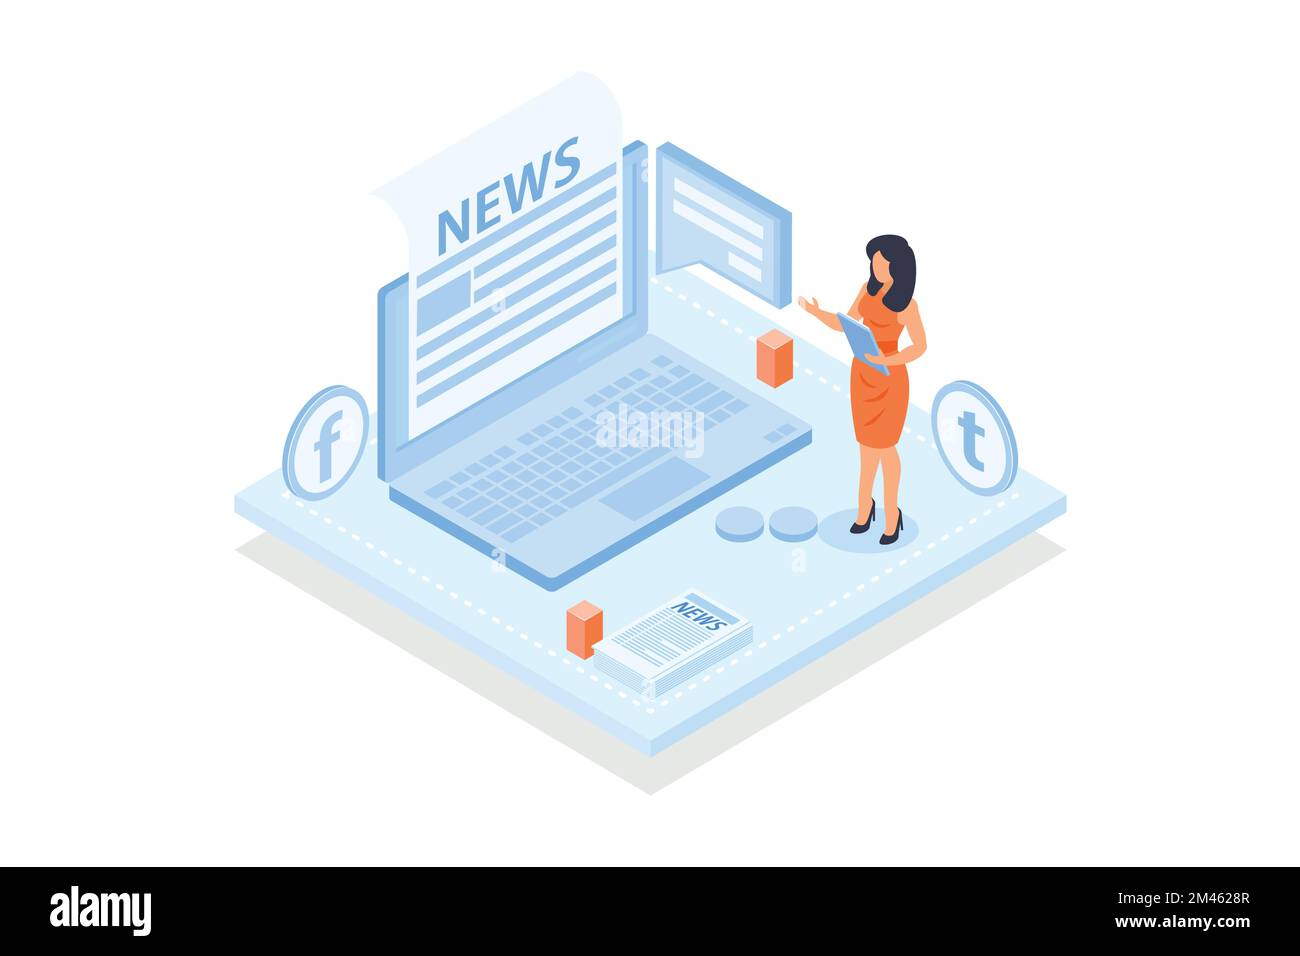 Conceptual template with person sitting in front of laptop computer and reading newspaper on screen. Scene for subscription to newsletter or news via Stock Vector